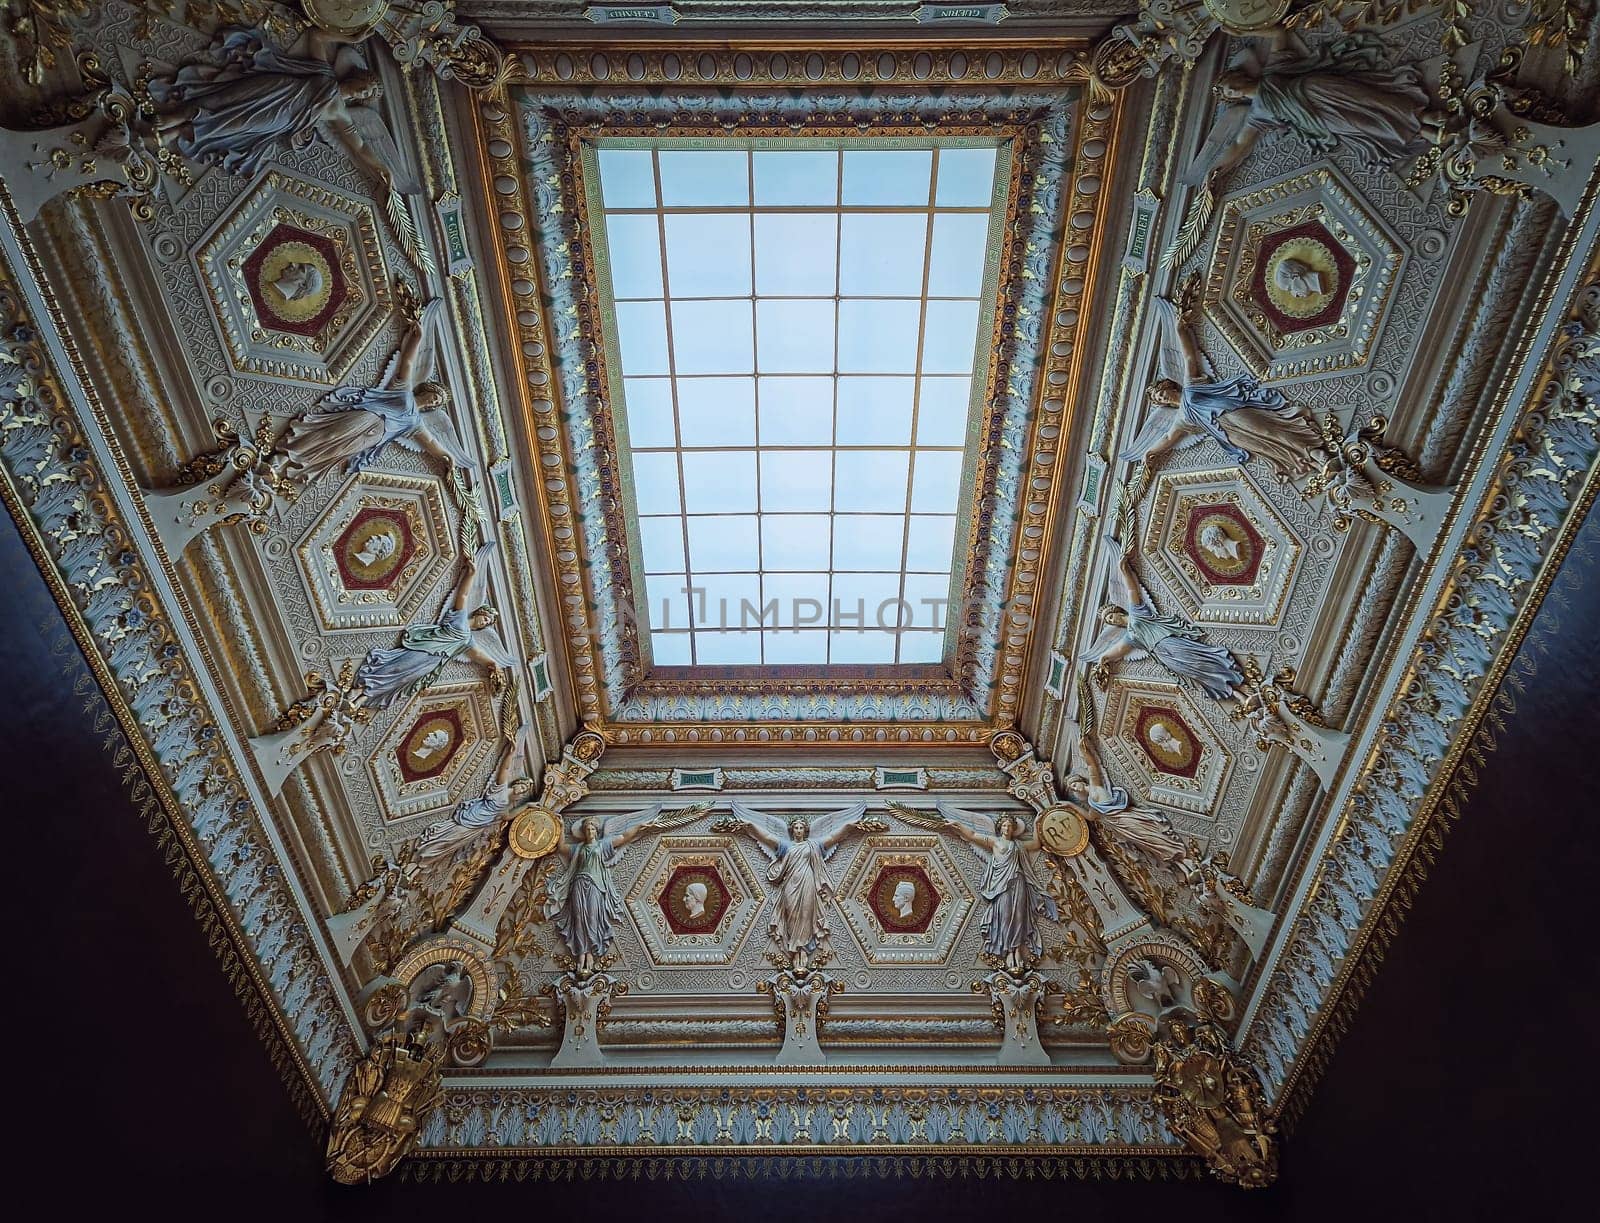 Louvre Palais ornate ceiling with glass window in center. Angels sculptures with golden decorations